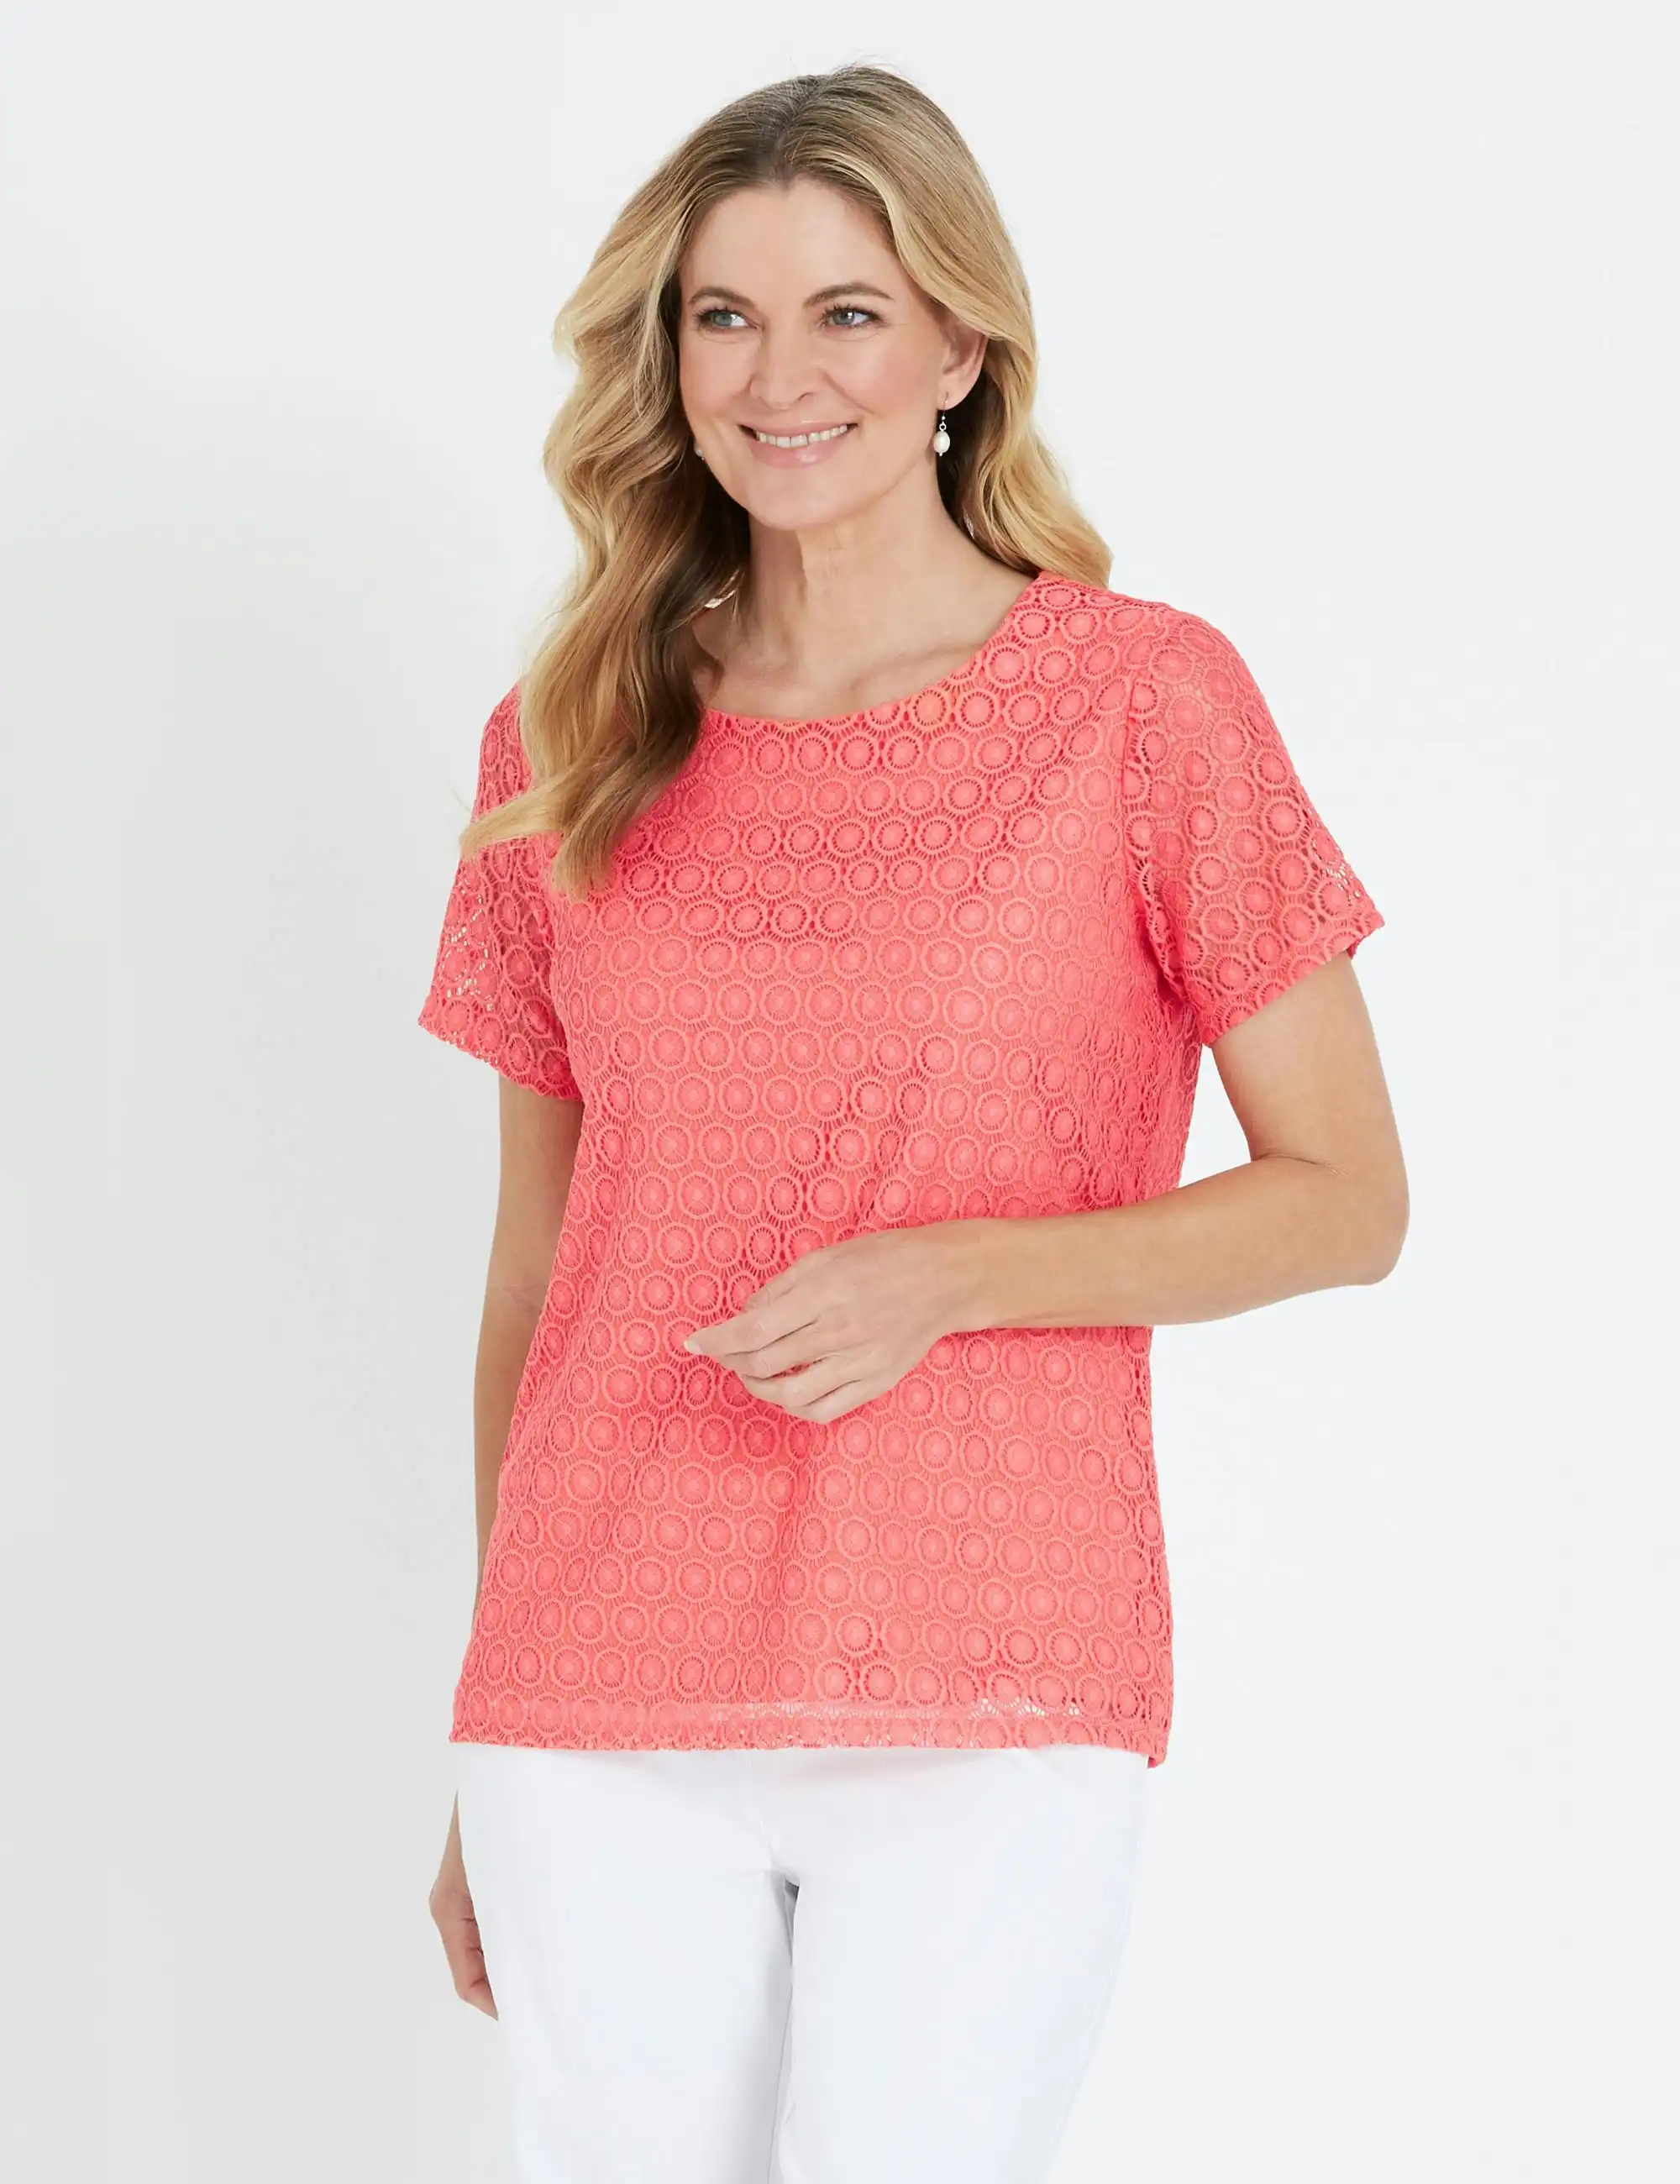 Noni B Short Sleeve Floral Lace Top